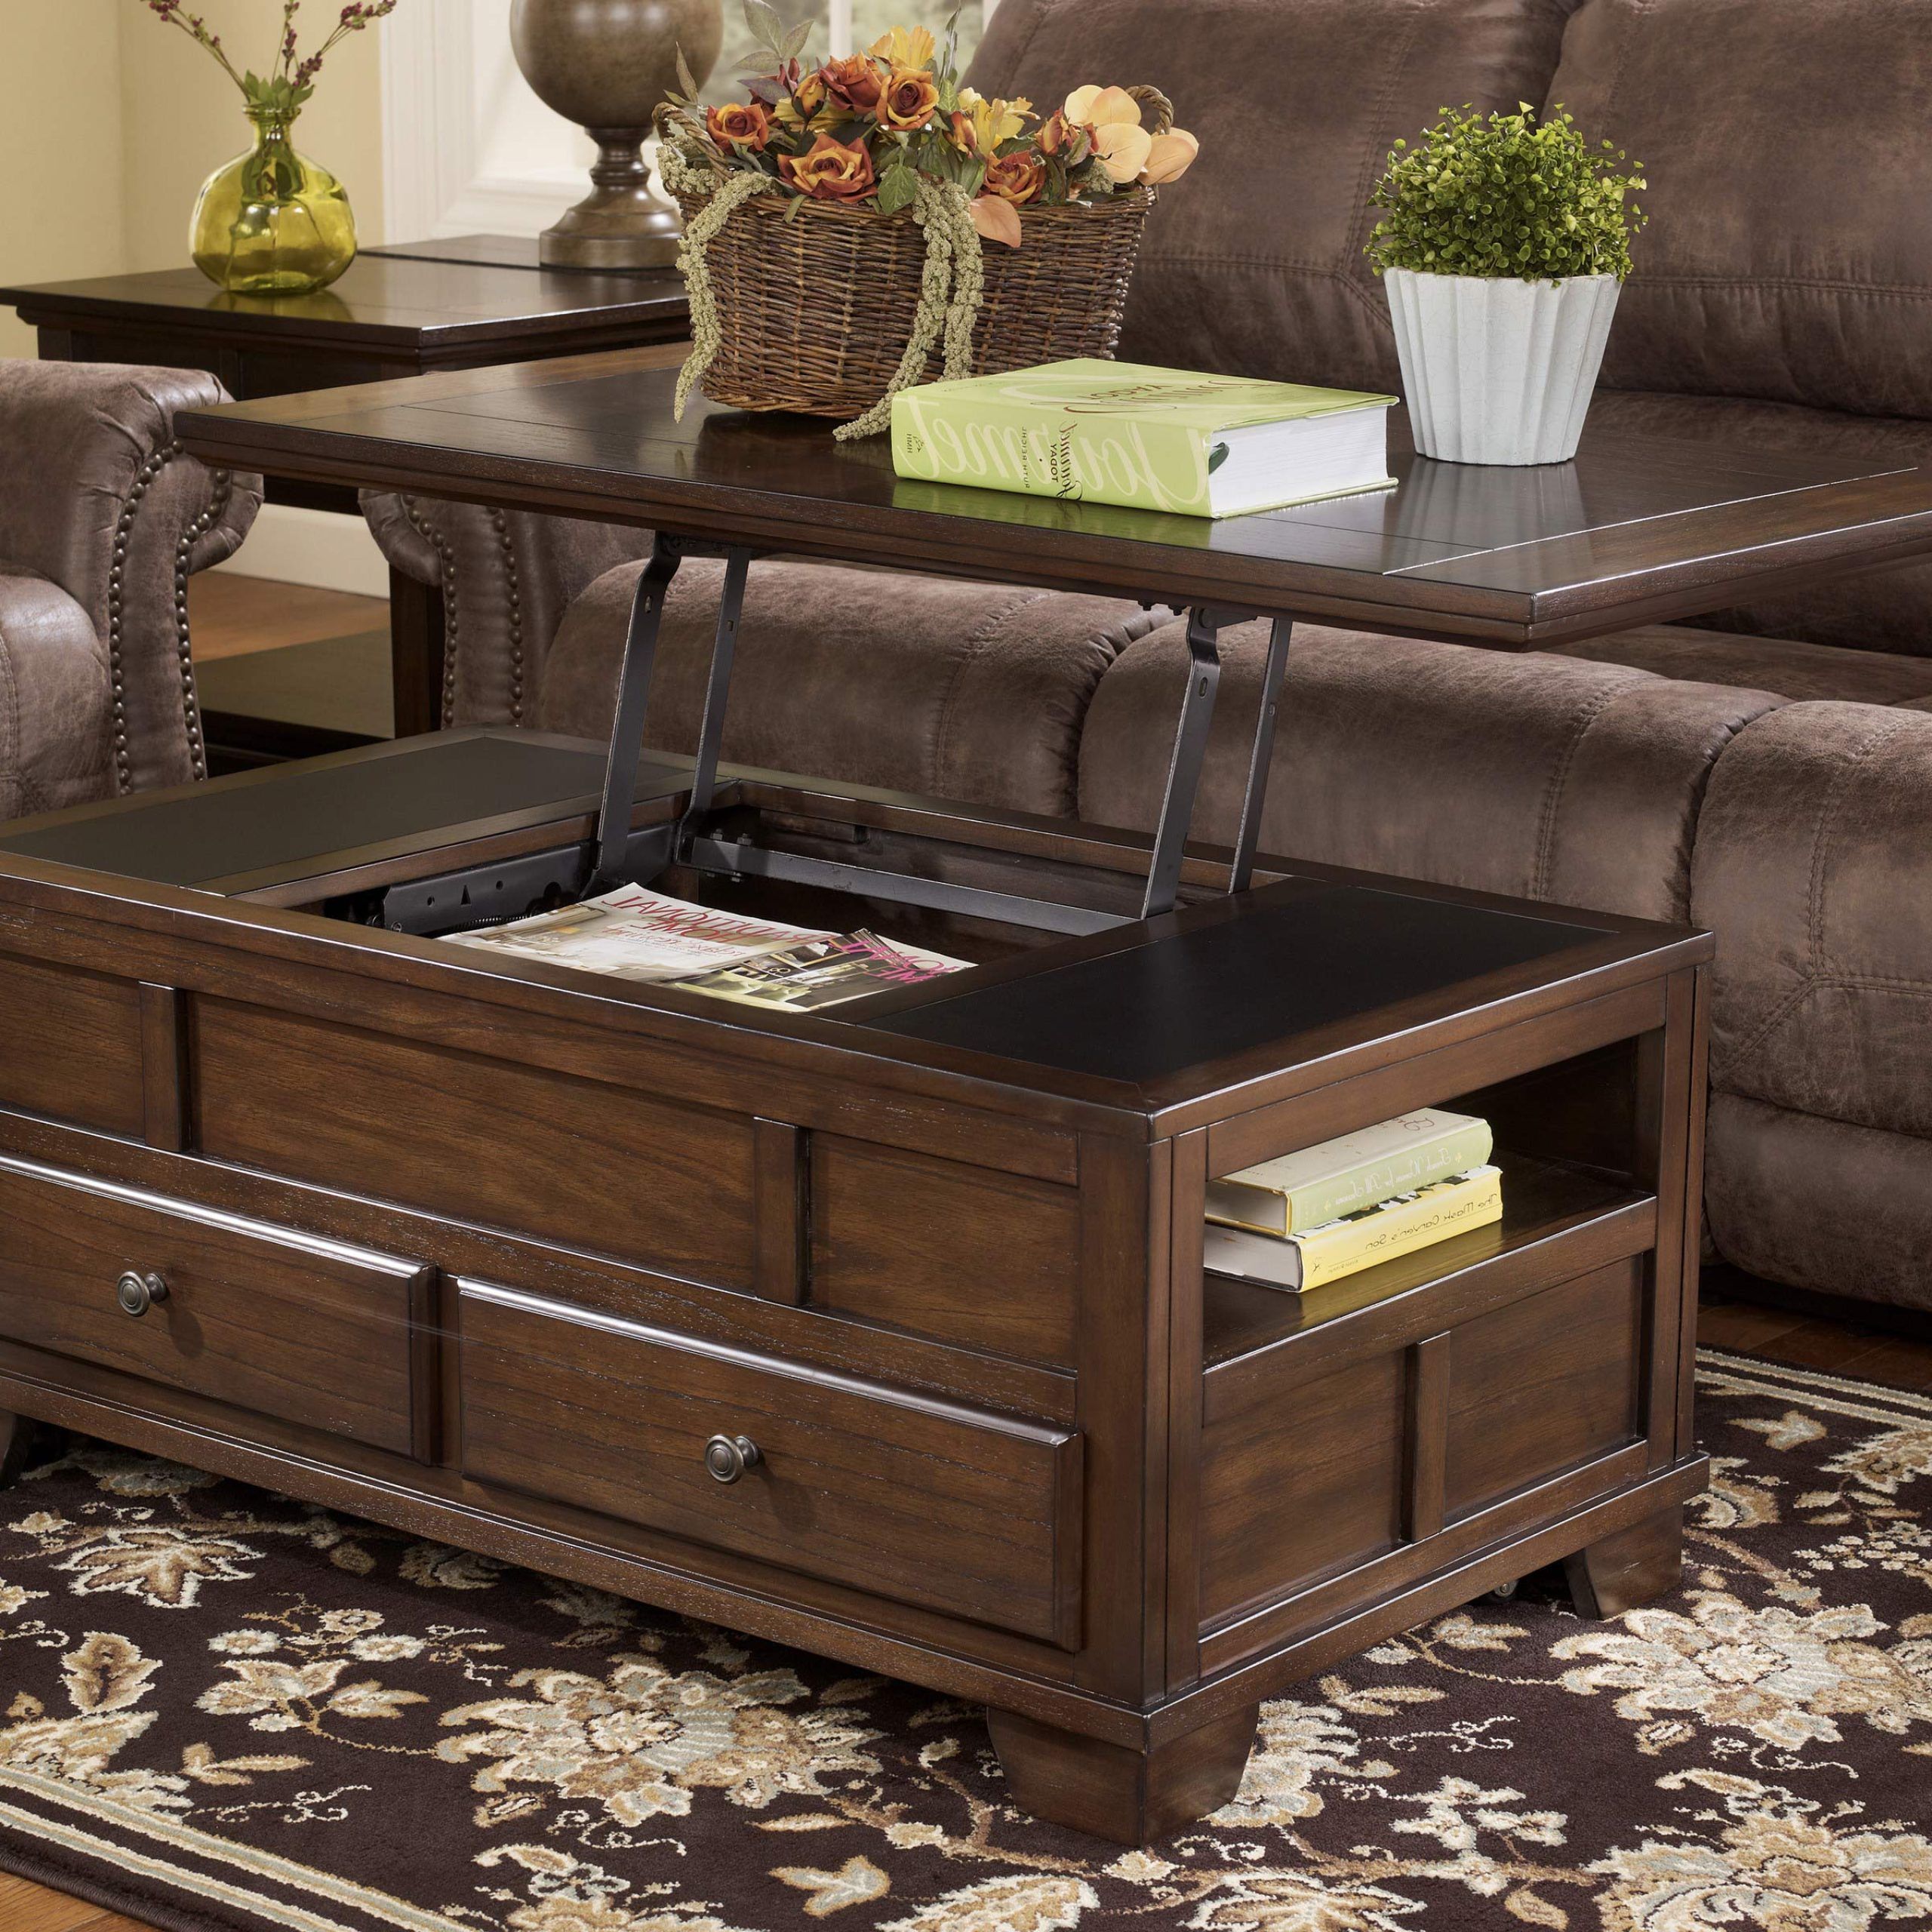 Lift Top Coffee Tables With Storage Regarding Lift Top Coffee Tables With Shelves (Gallery 3 of 20)